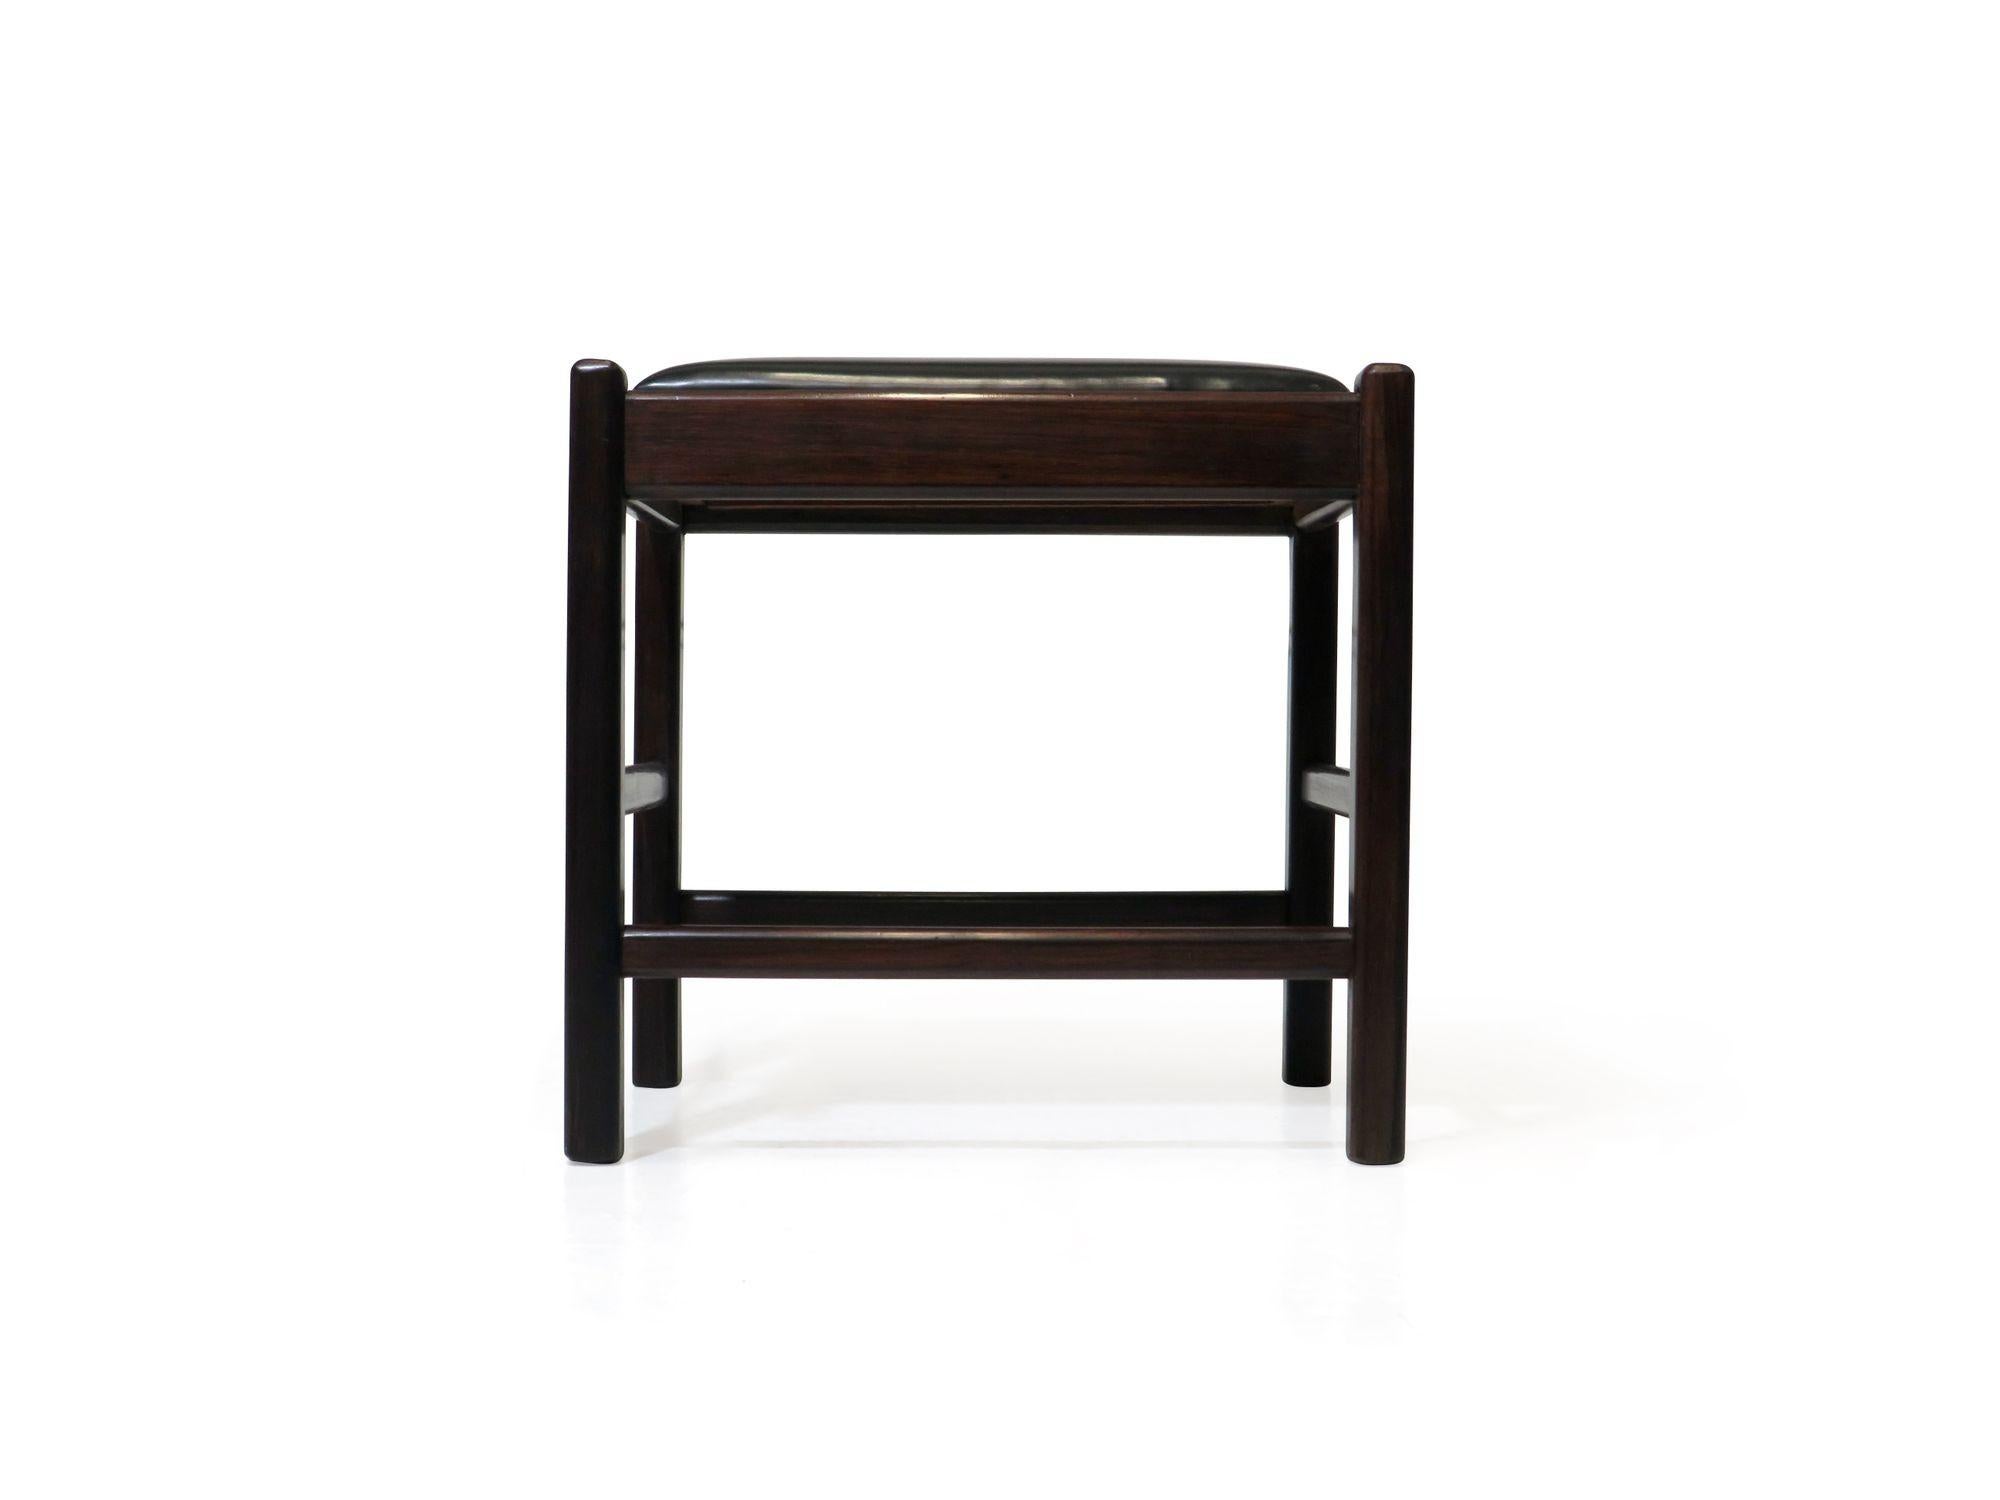 Brazilian rosewood bench designed by Sergio Rodriguez crafted of solid, dark brazilian rosewood and upholstred in the original black vinyl. Sturdy.